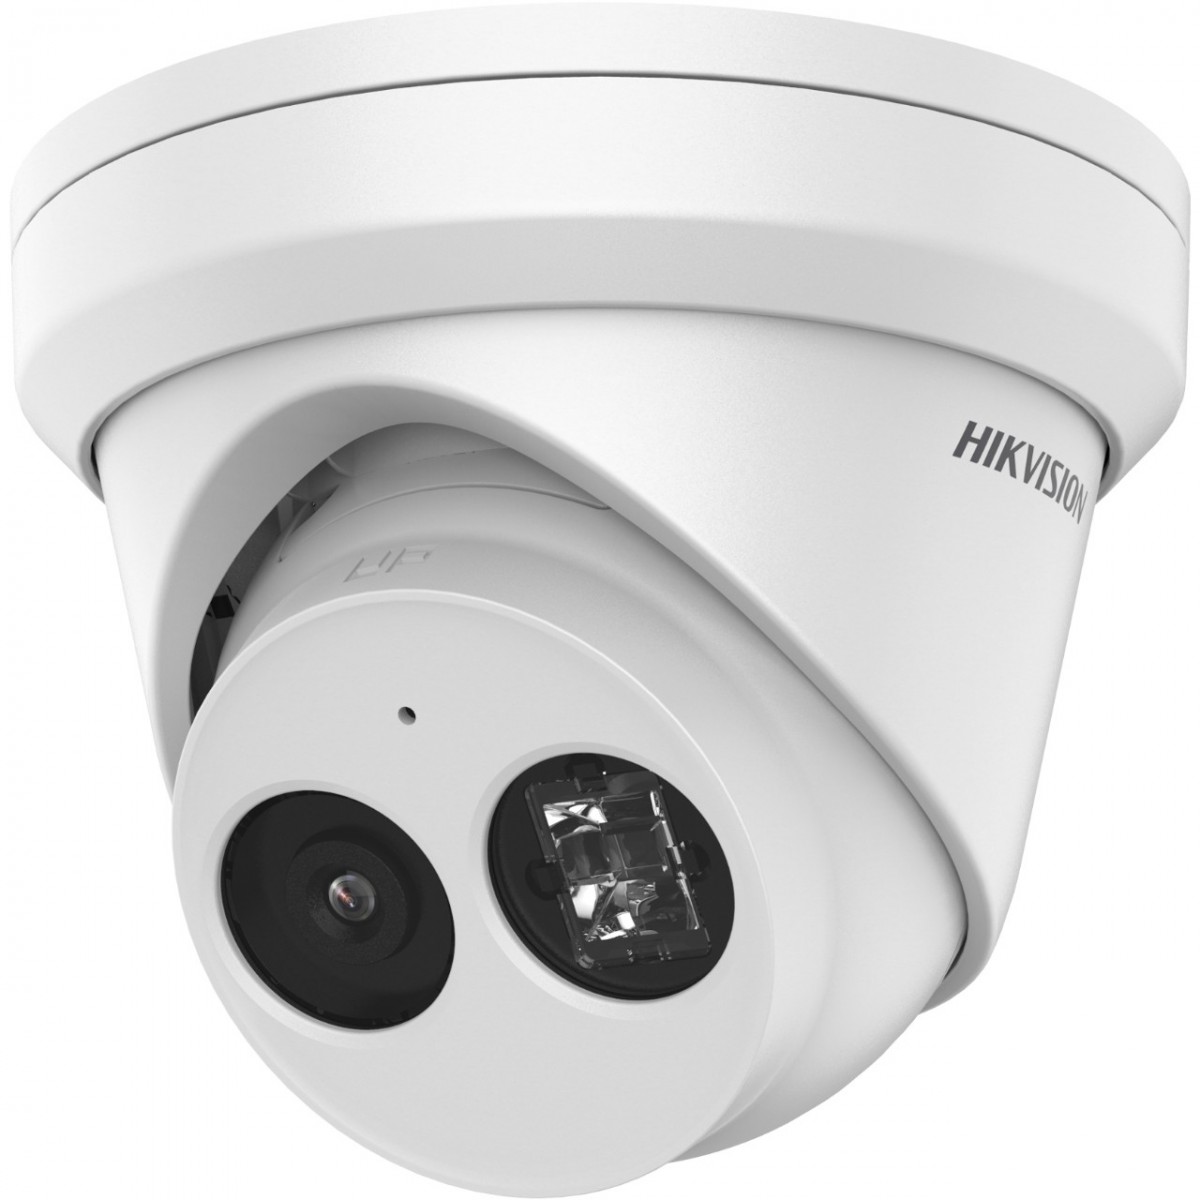 Hikvision Digital Technology DS-2CD2323G2-IU - IP security camera - Outdoor - Wired - FCC (47 CFR 15 - B); CE-EMC (EN 55032: 201